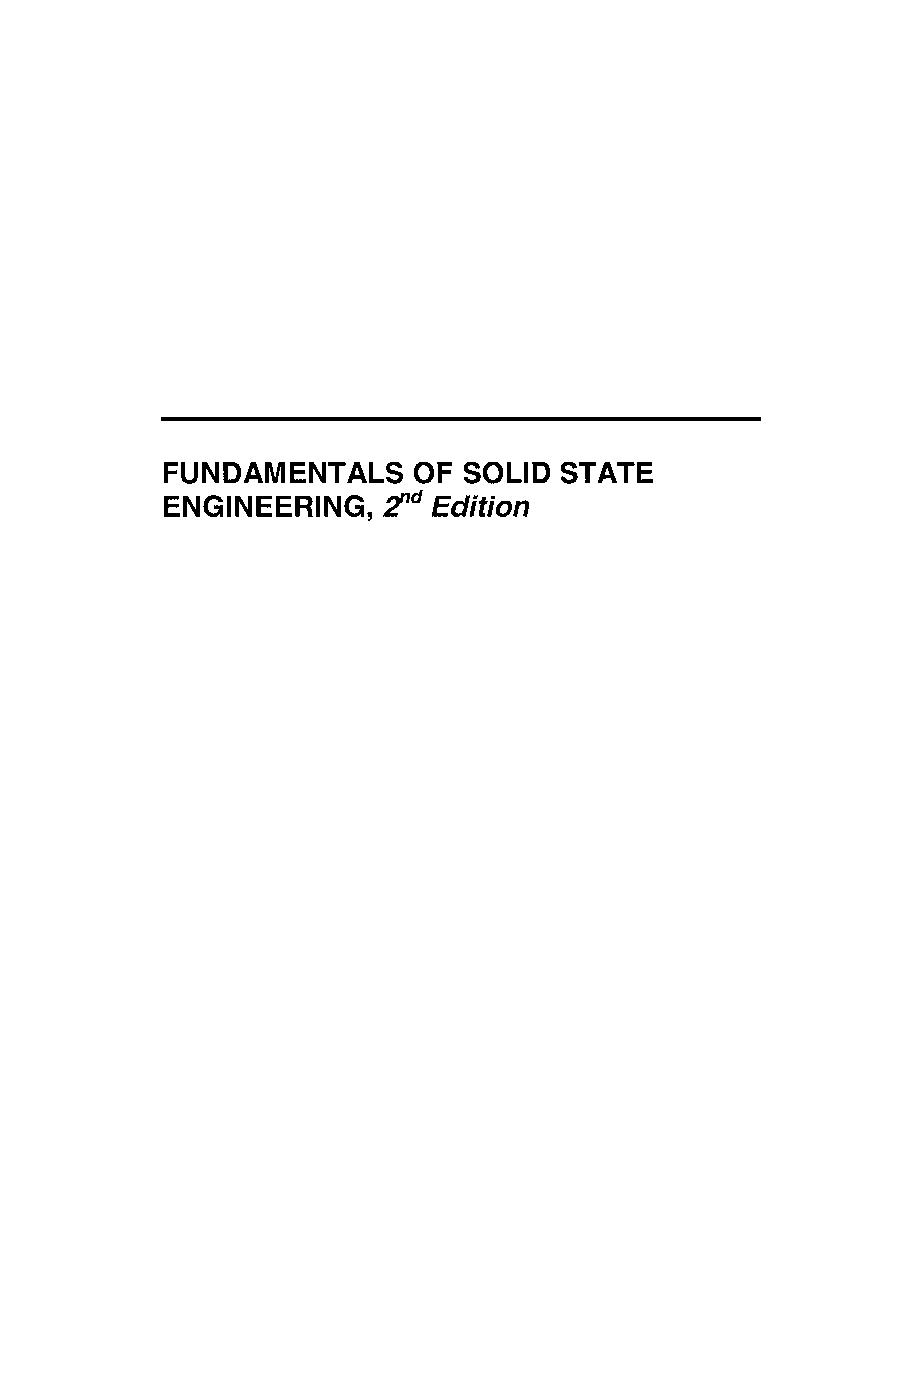 Fundamentals of Solid State Engineering by Manijeh Razeghi